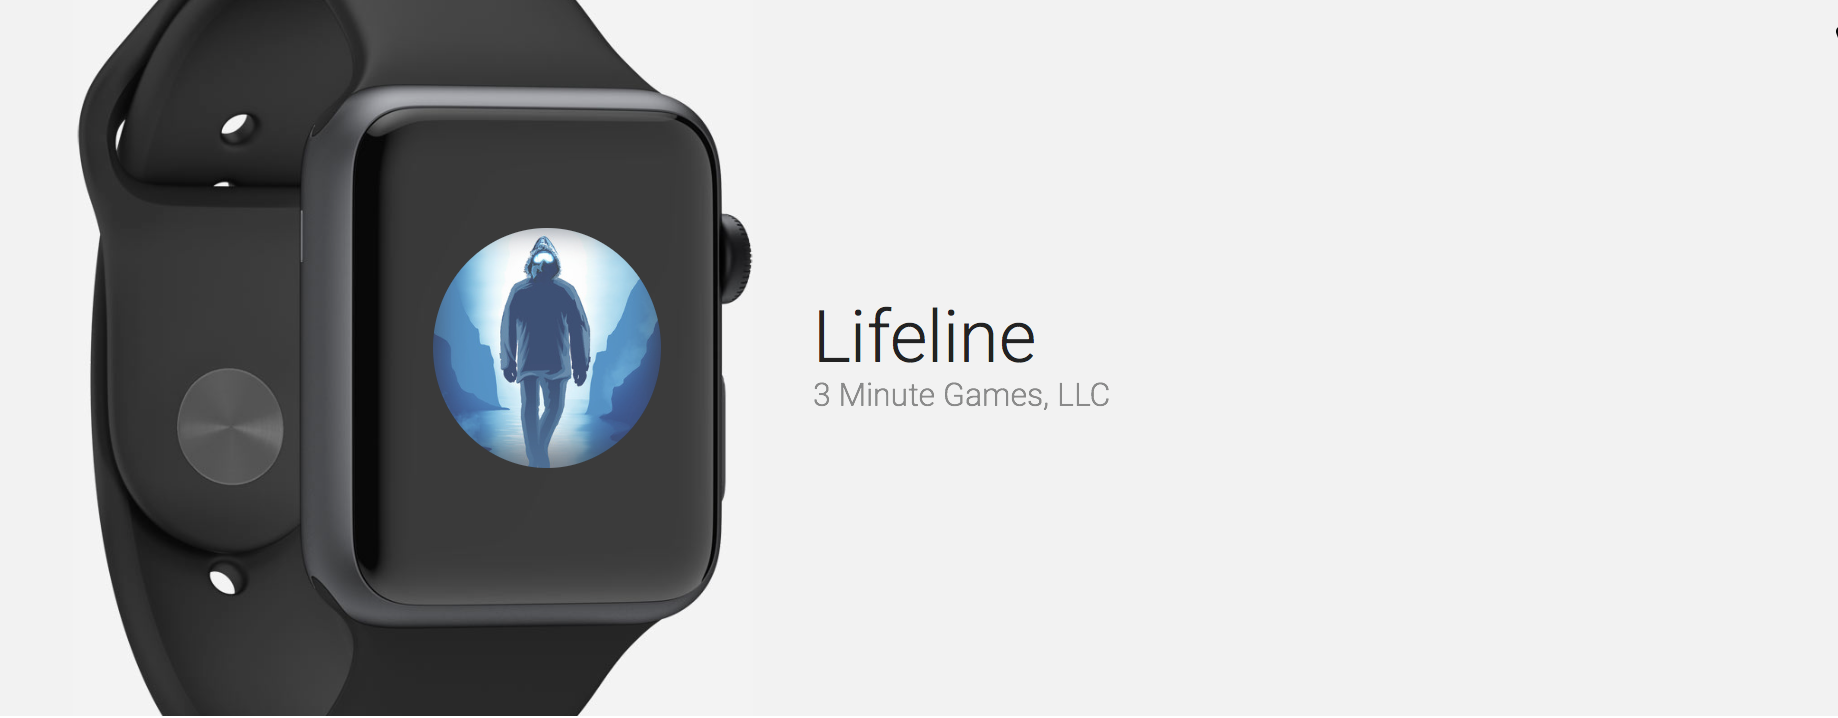 Lifeline: Whiteout is an Exciting Game to Play on the Apple Watch